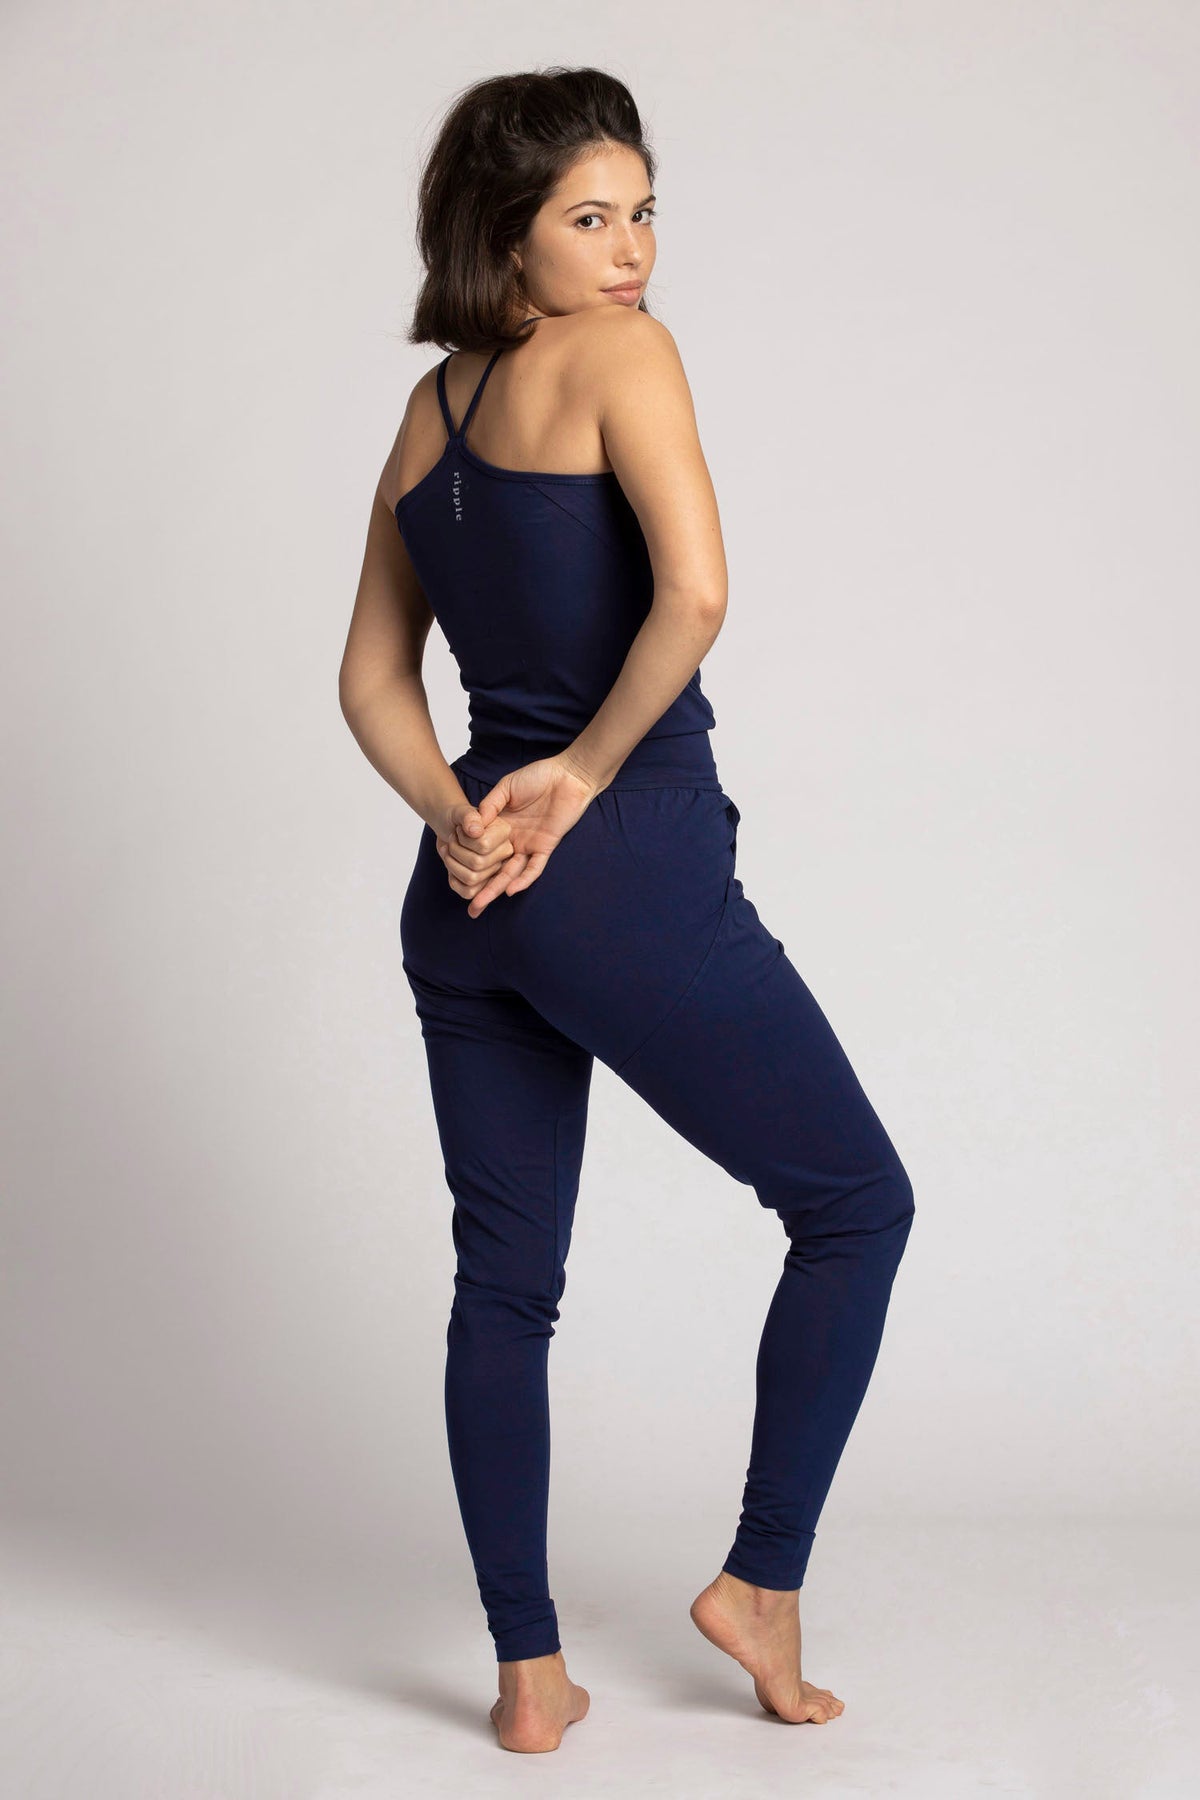 I’mPerfect Organic Cotton Long Jumpsuit 35%off